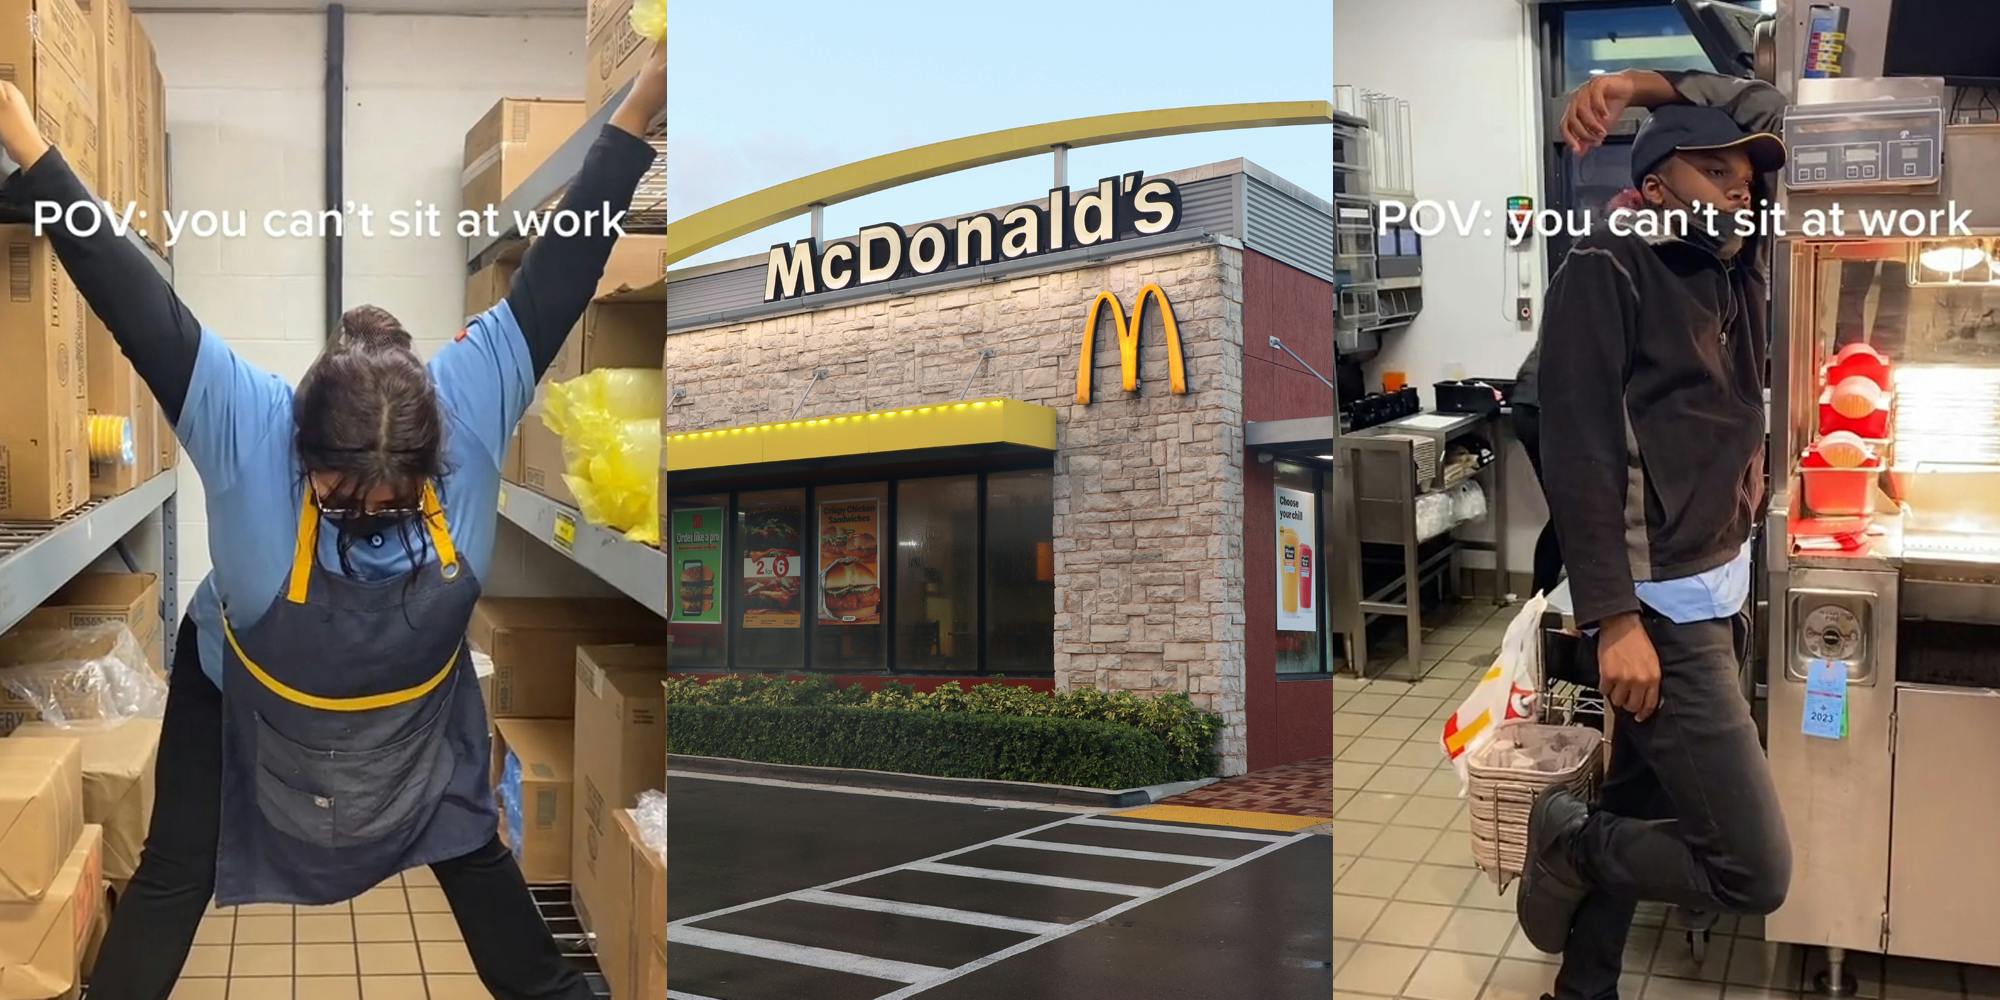 McDonald's employee standing with arms and legs out with caption "POV: you can't sit at work" (l) McDonald's building with sign (c) McDonald's employee standing with arm up leaning with caption "POV: you can't sit at work" (r)